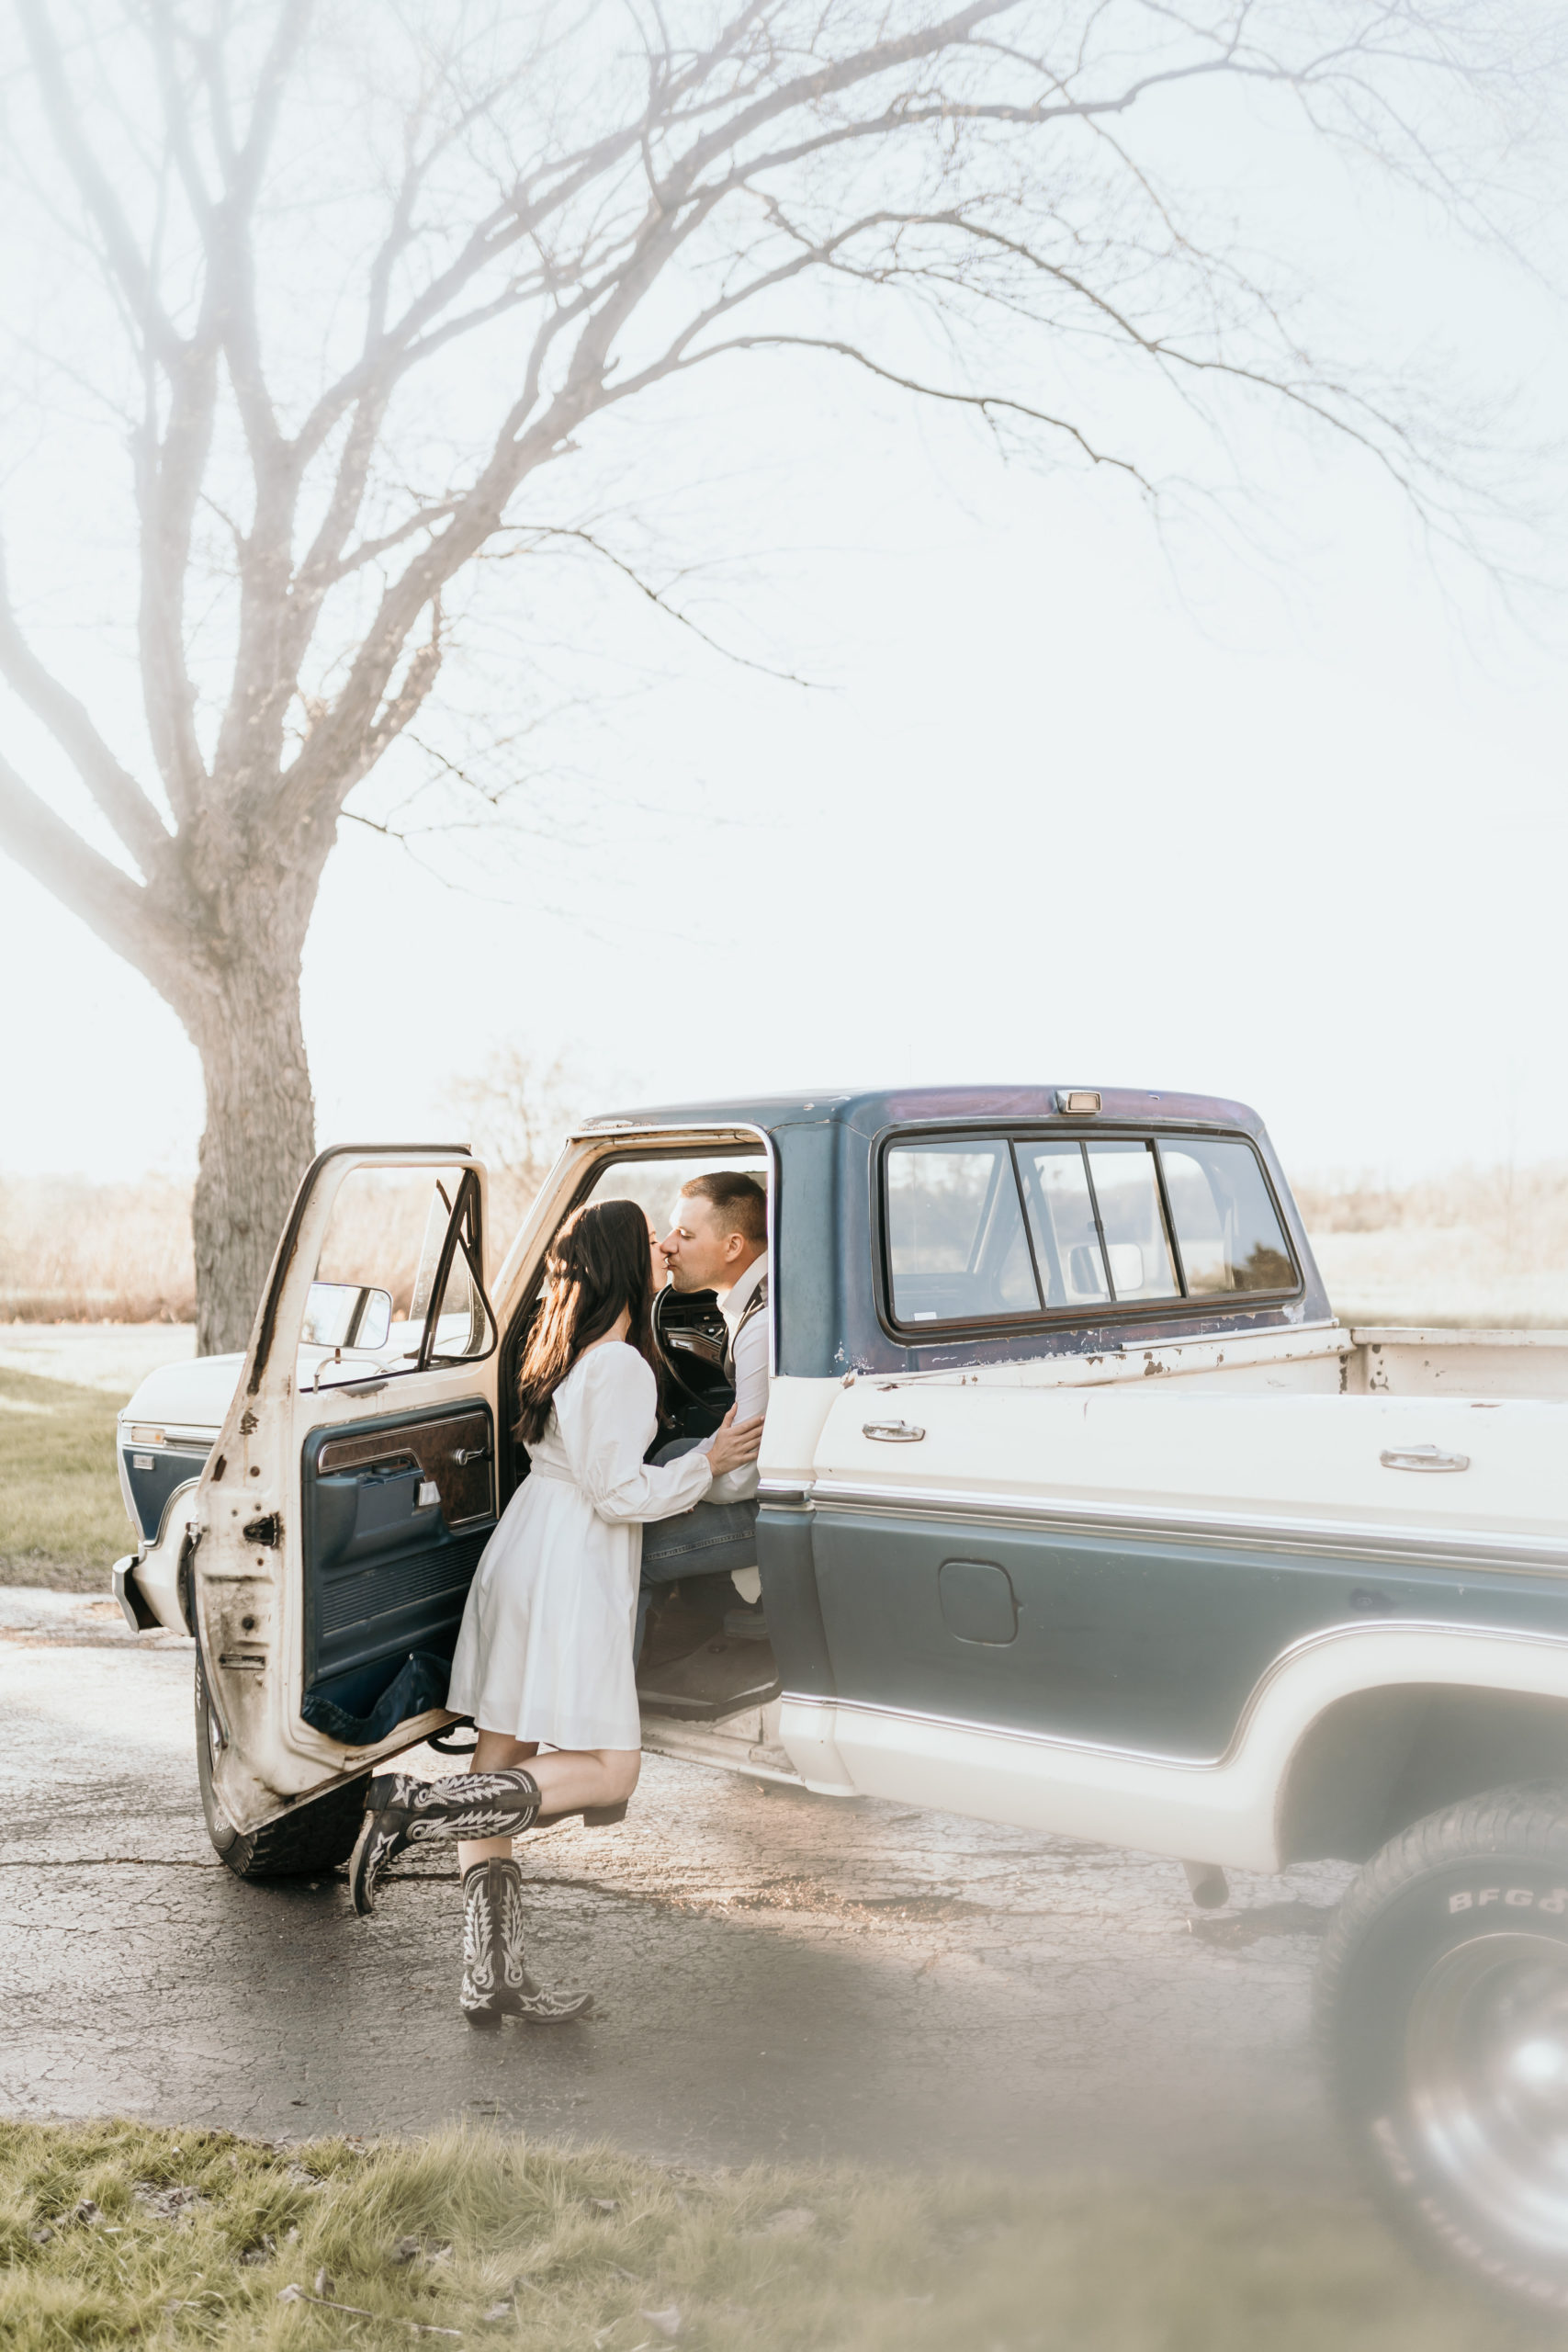 Engagement Session Locations in Buffalo, New York